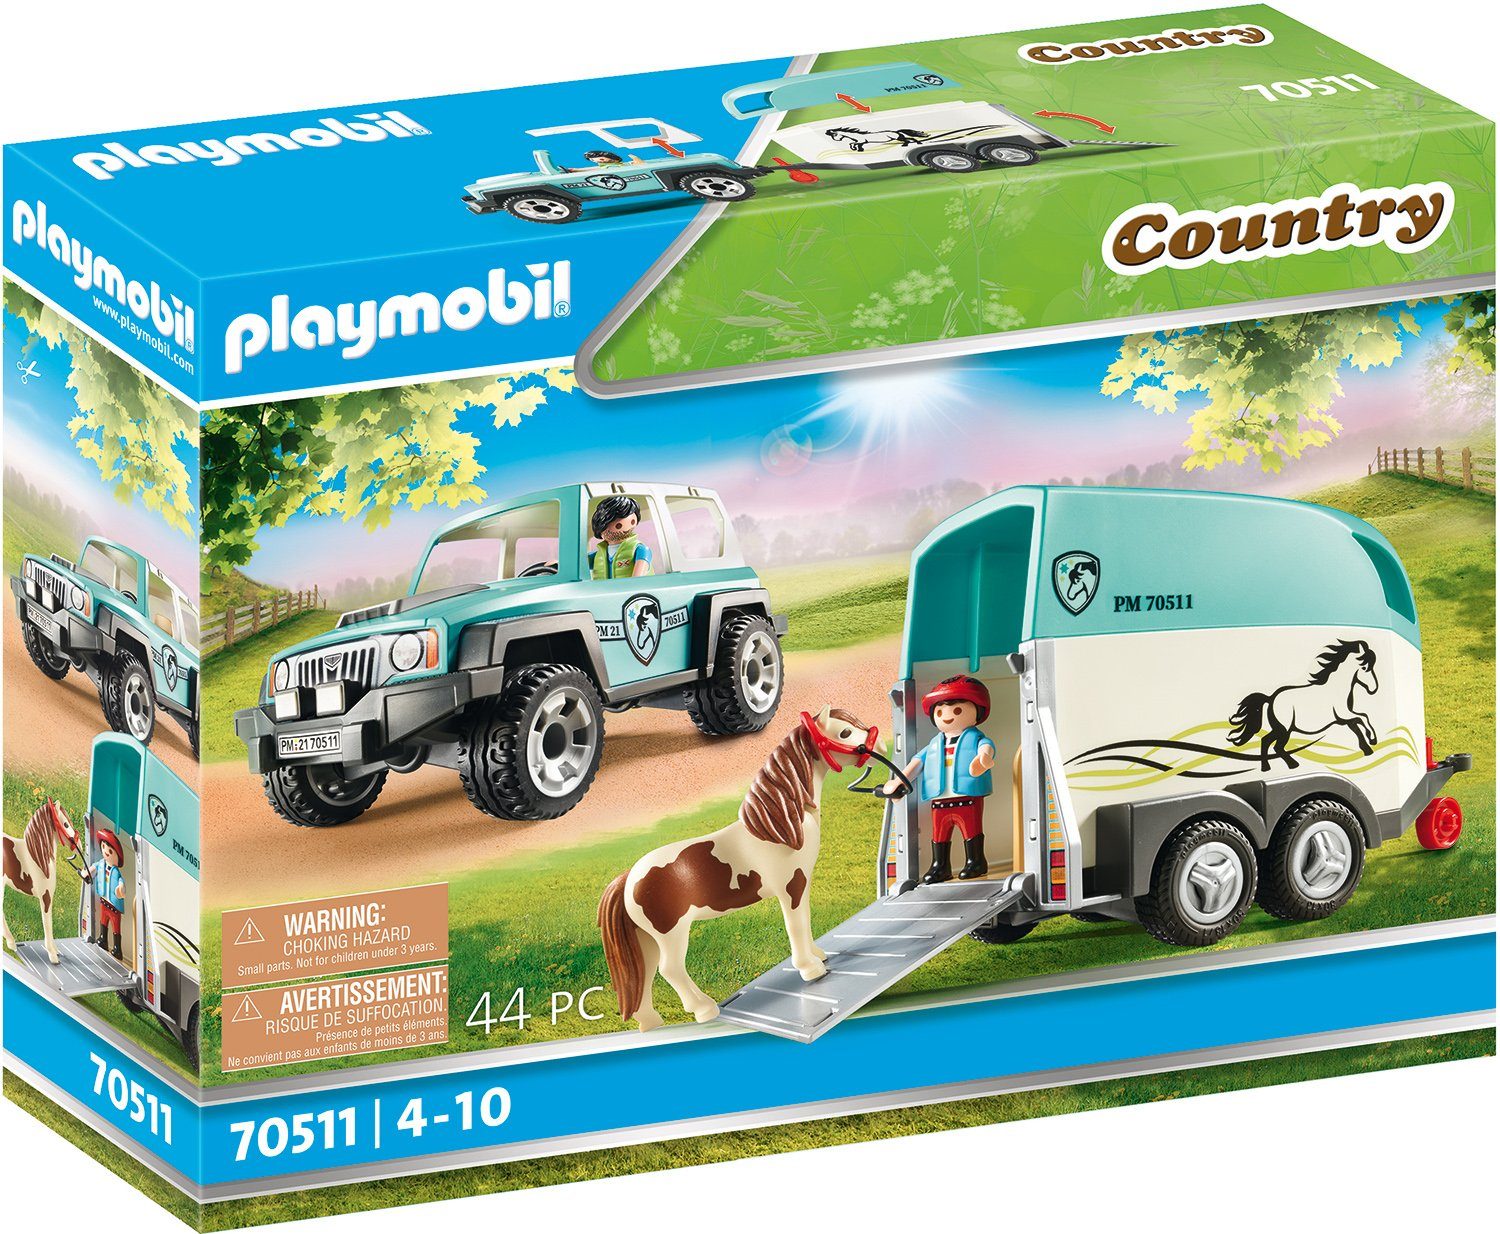 Ponyanhänger Konstruktions-Spielset Playmobil® (70511), Country, (44 Made Germany mit PKW in St),